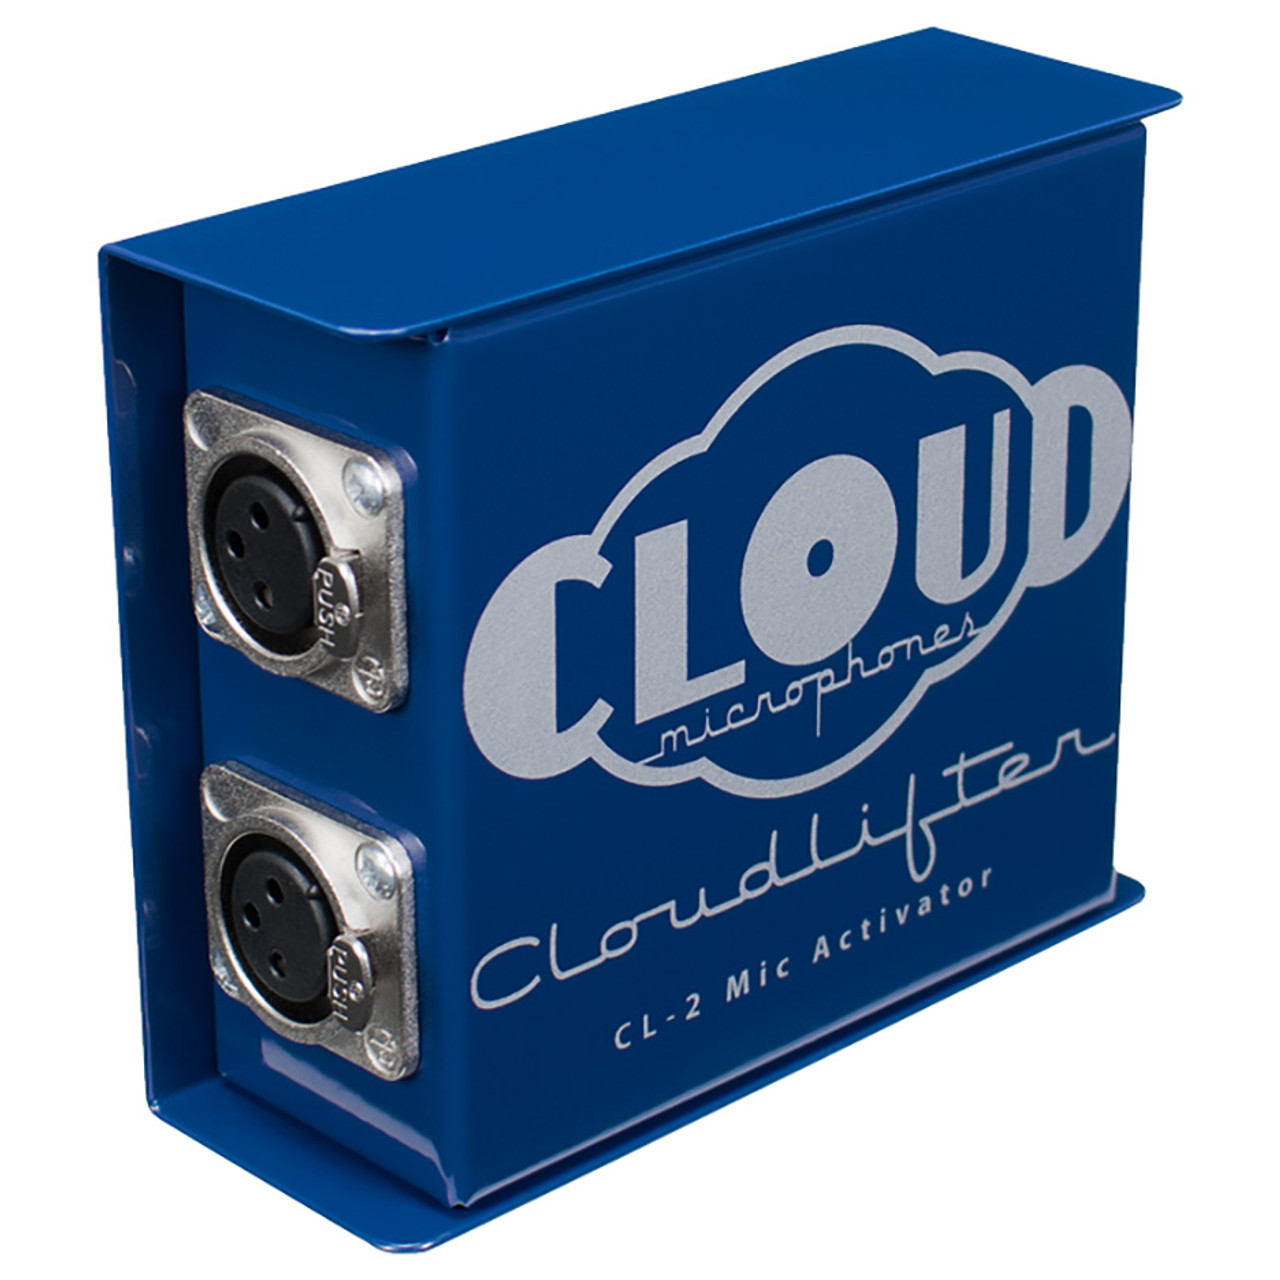 Cloudlifter CL-2 two channel Mic Activator